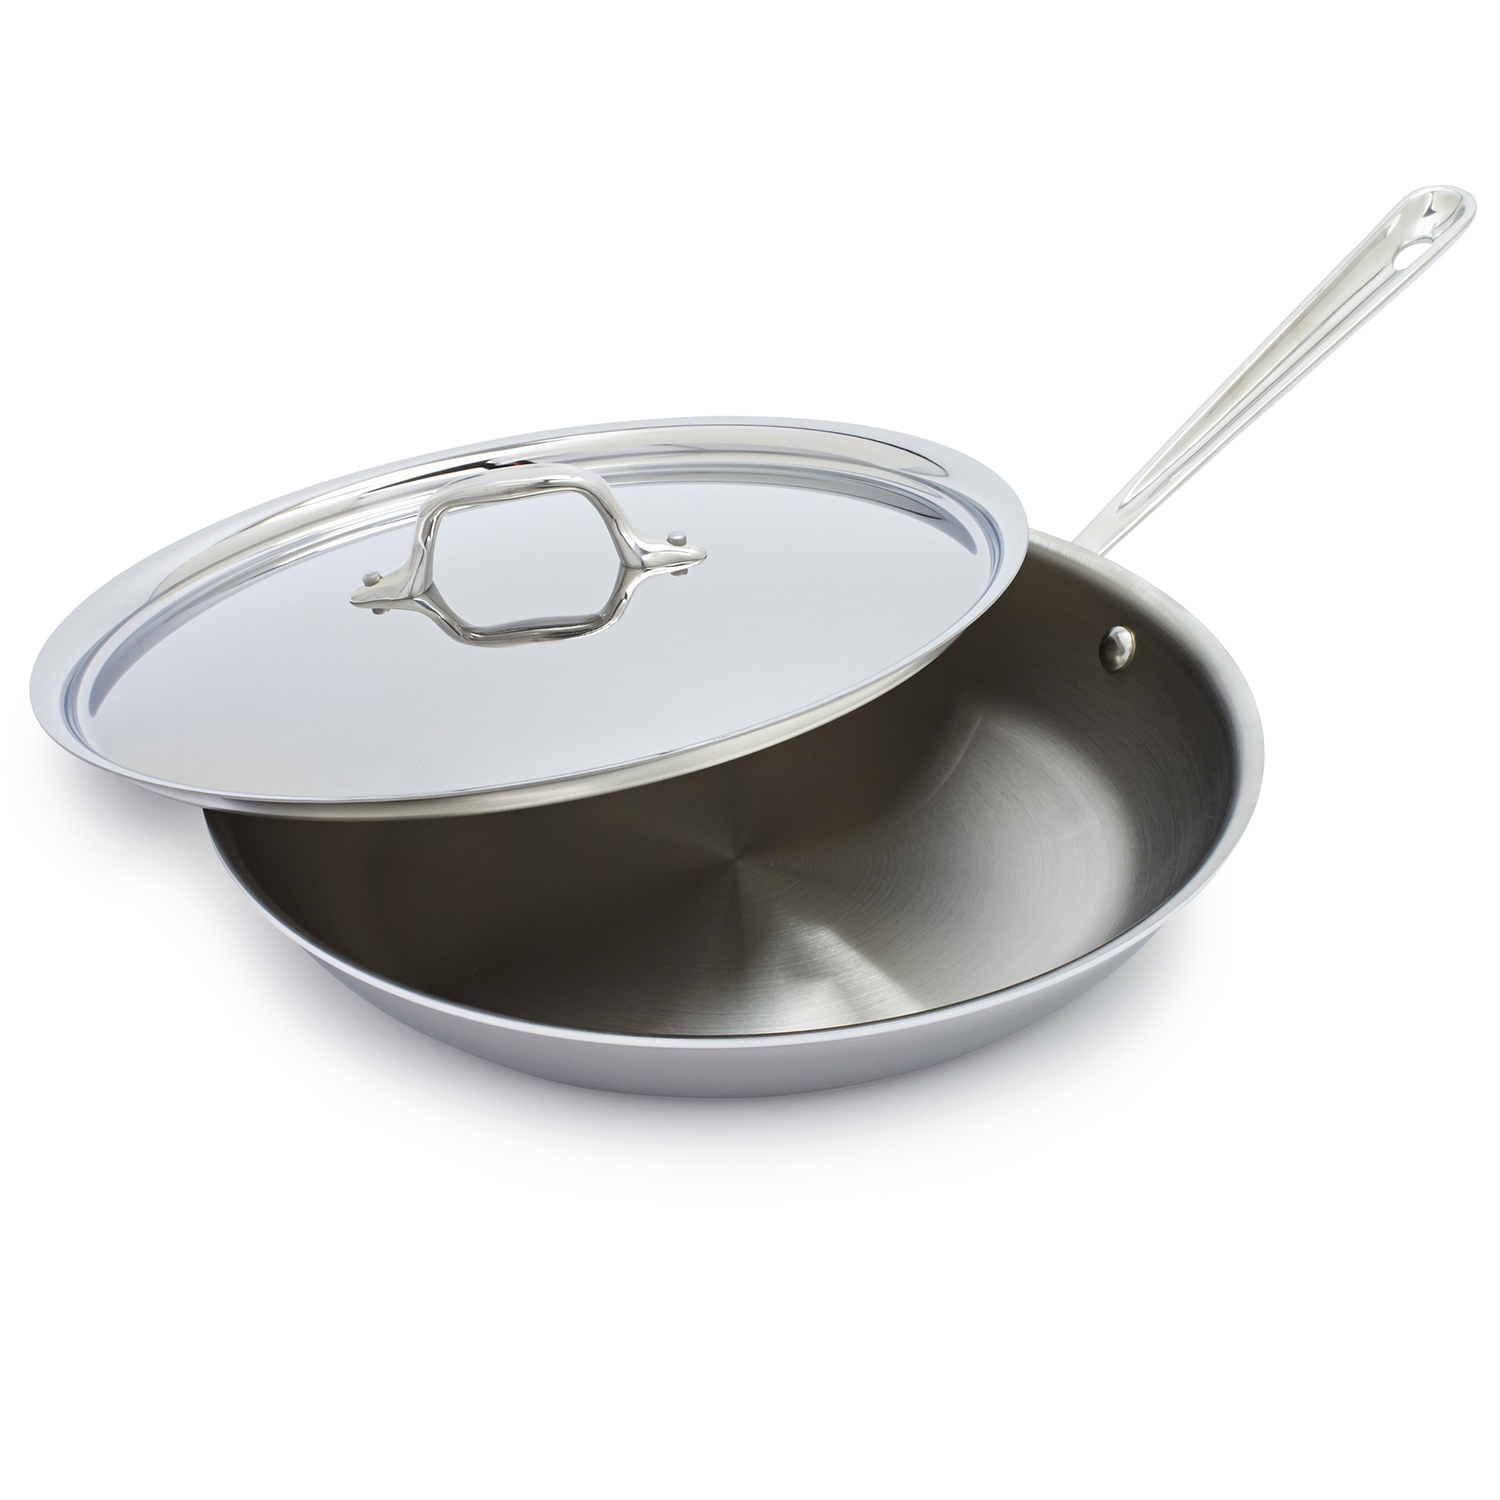 All-Clad D3 Stainless Steel Frying pan cookware set Silver 10-Inch and 12-Inch 